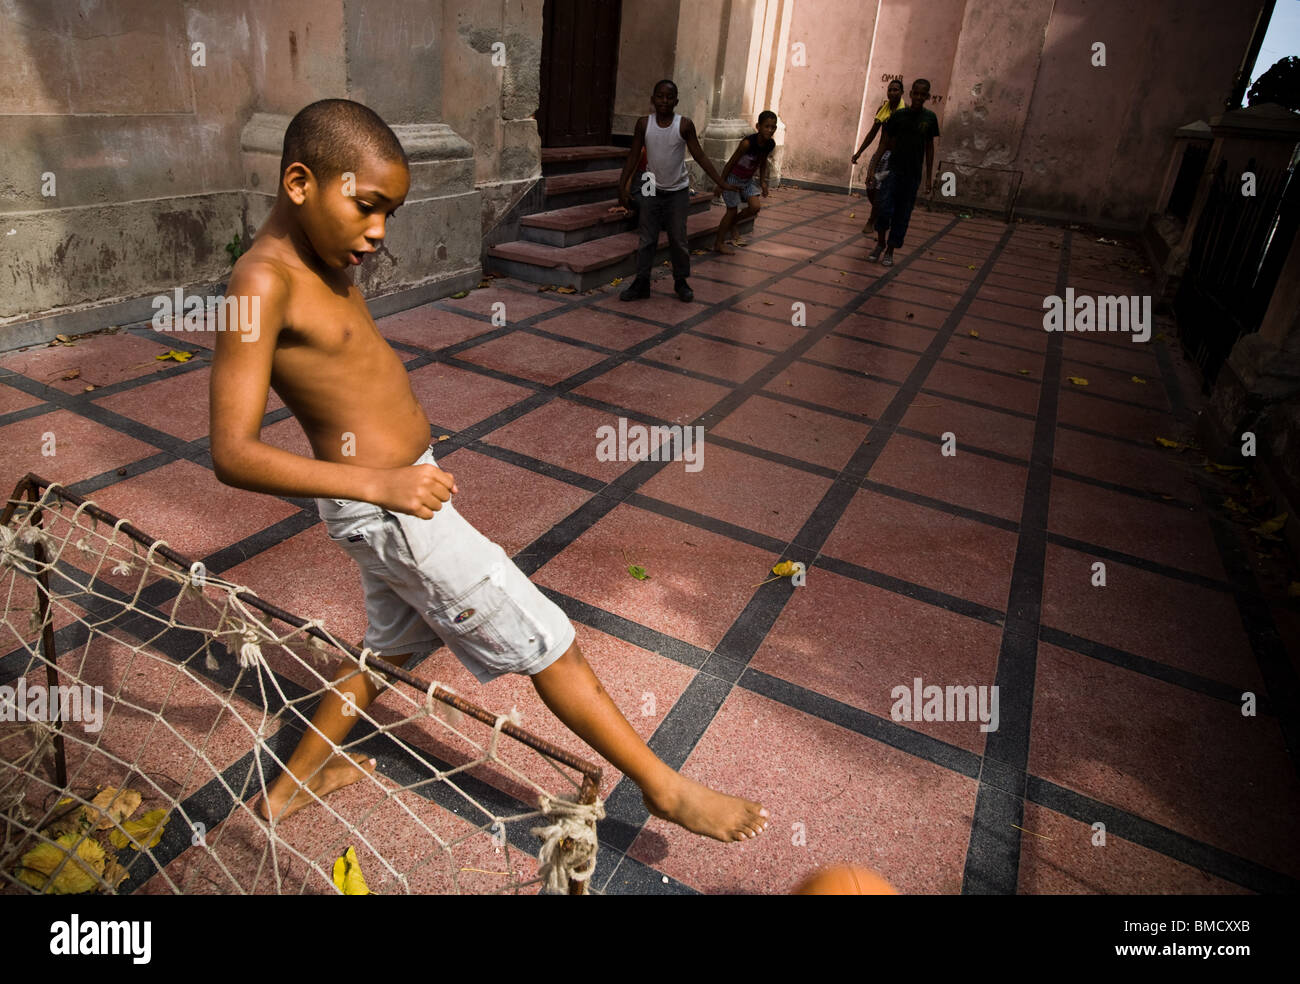 Boys play football in the courtyard of a church in Santiago, Cuba on Wednesday July 9, 2008. Stock Photo